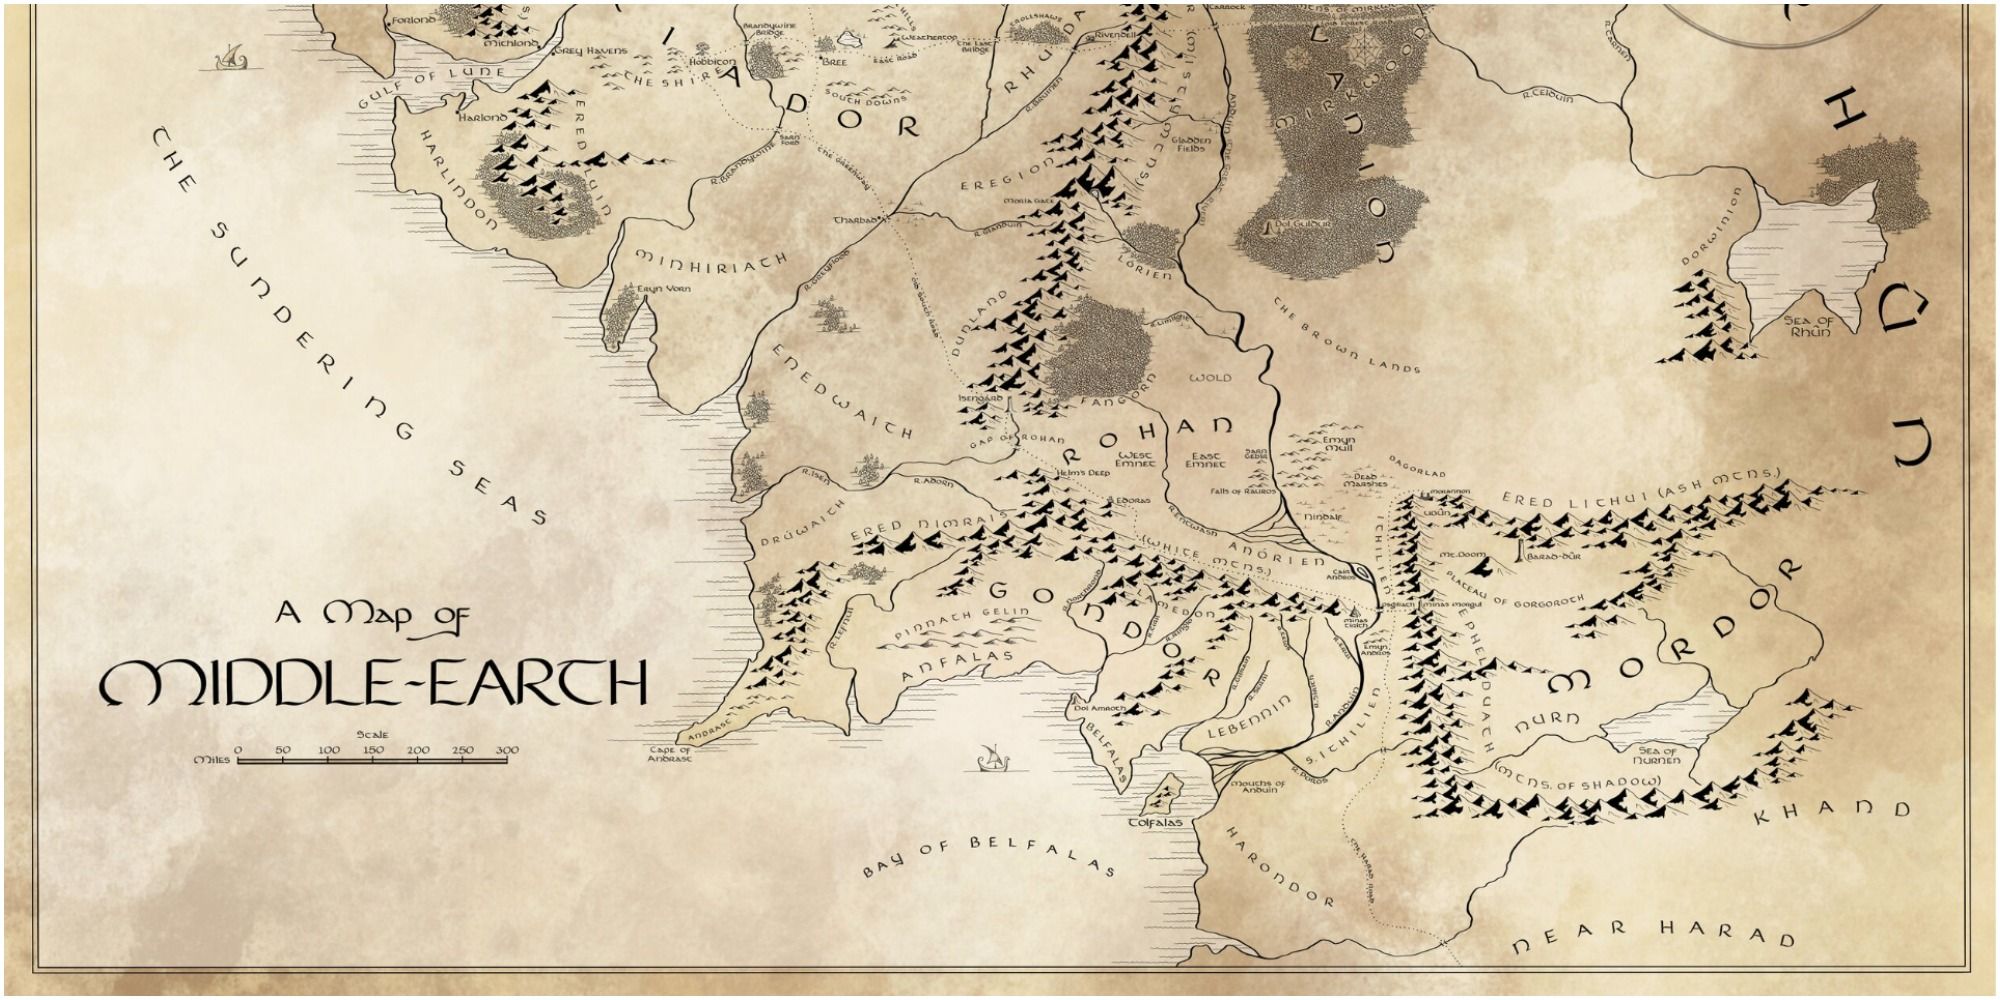 A map of Middle-earth